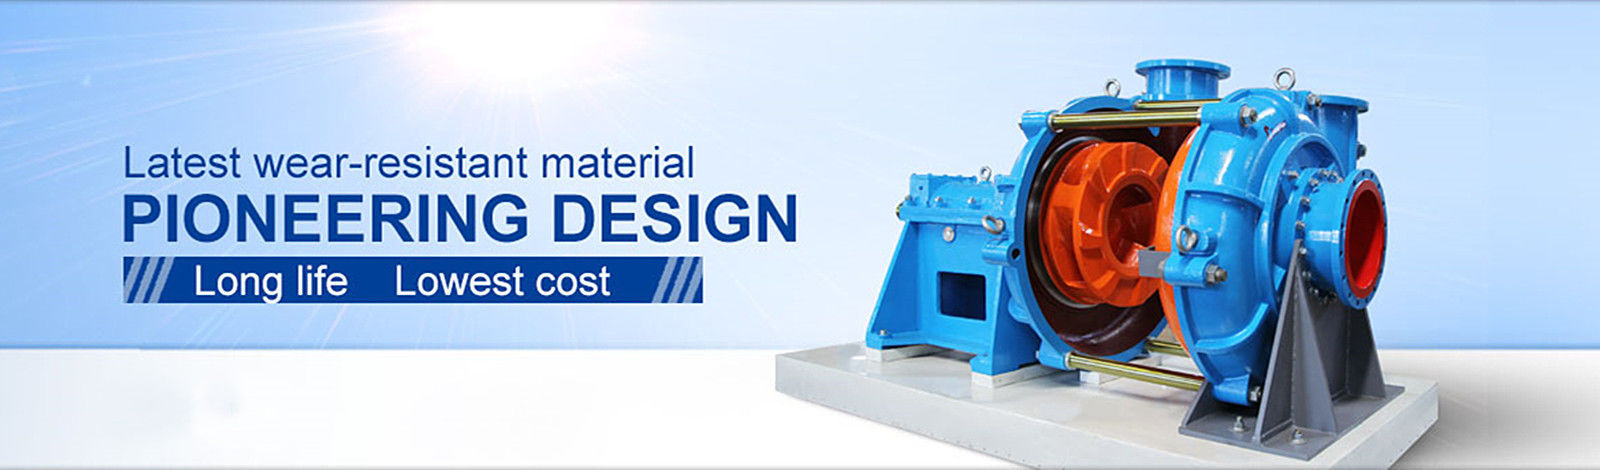 Magnetic Centrifugal Pump